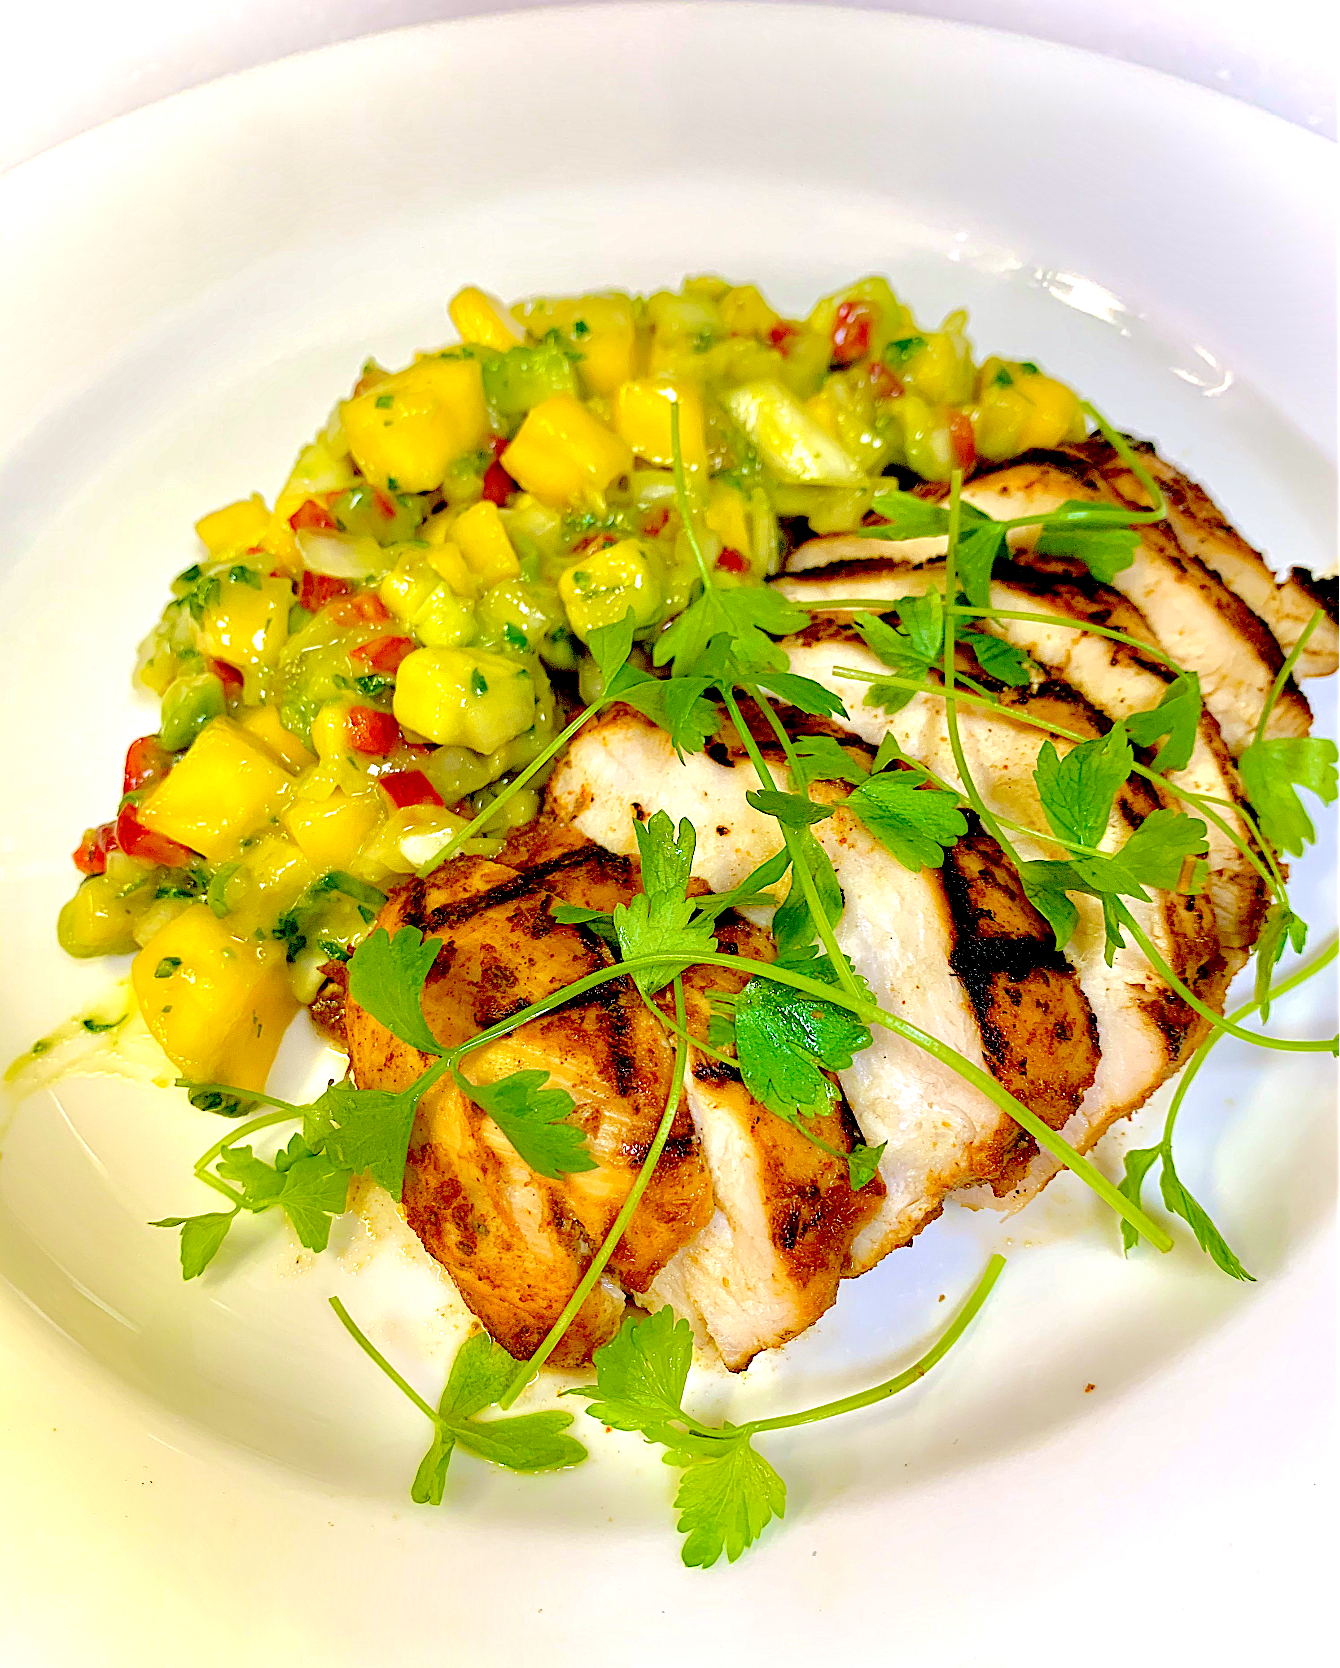 Cilantro Lime Grilled Spiced Chicken with Mango Avocado Salsa